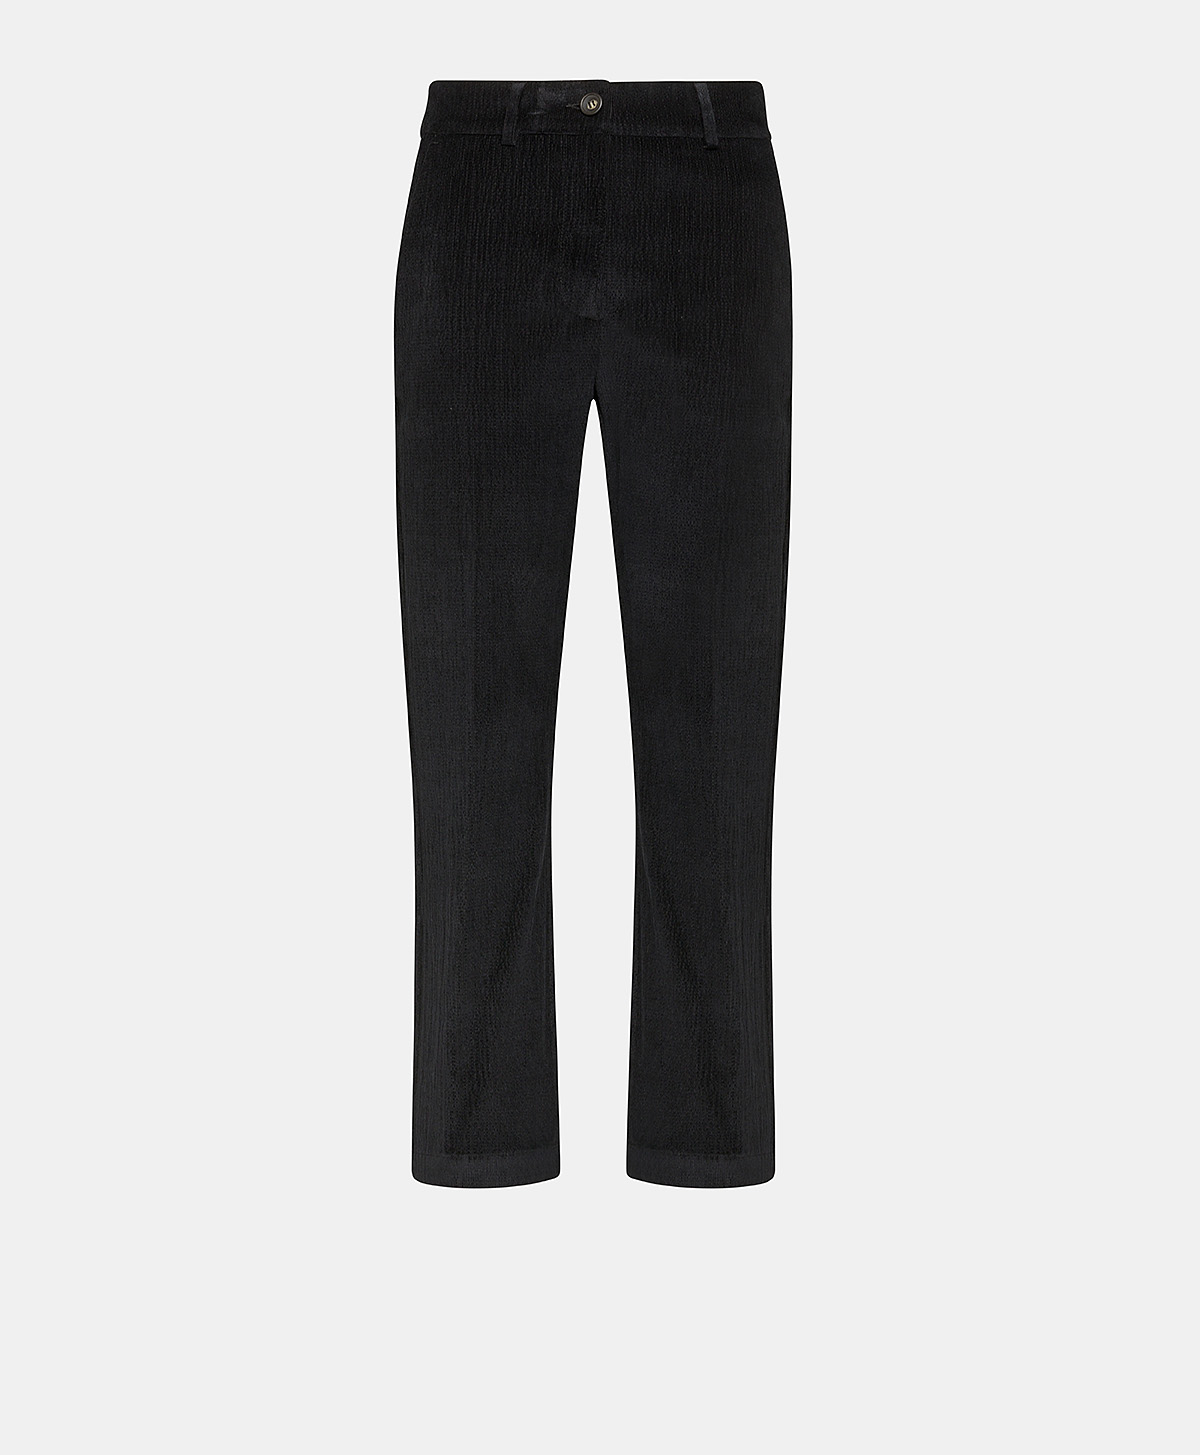 INDRA PANT IN STRETCH RIBBED CO/MO - BLACK - Momonì